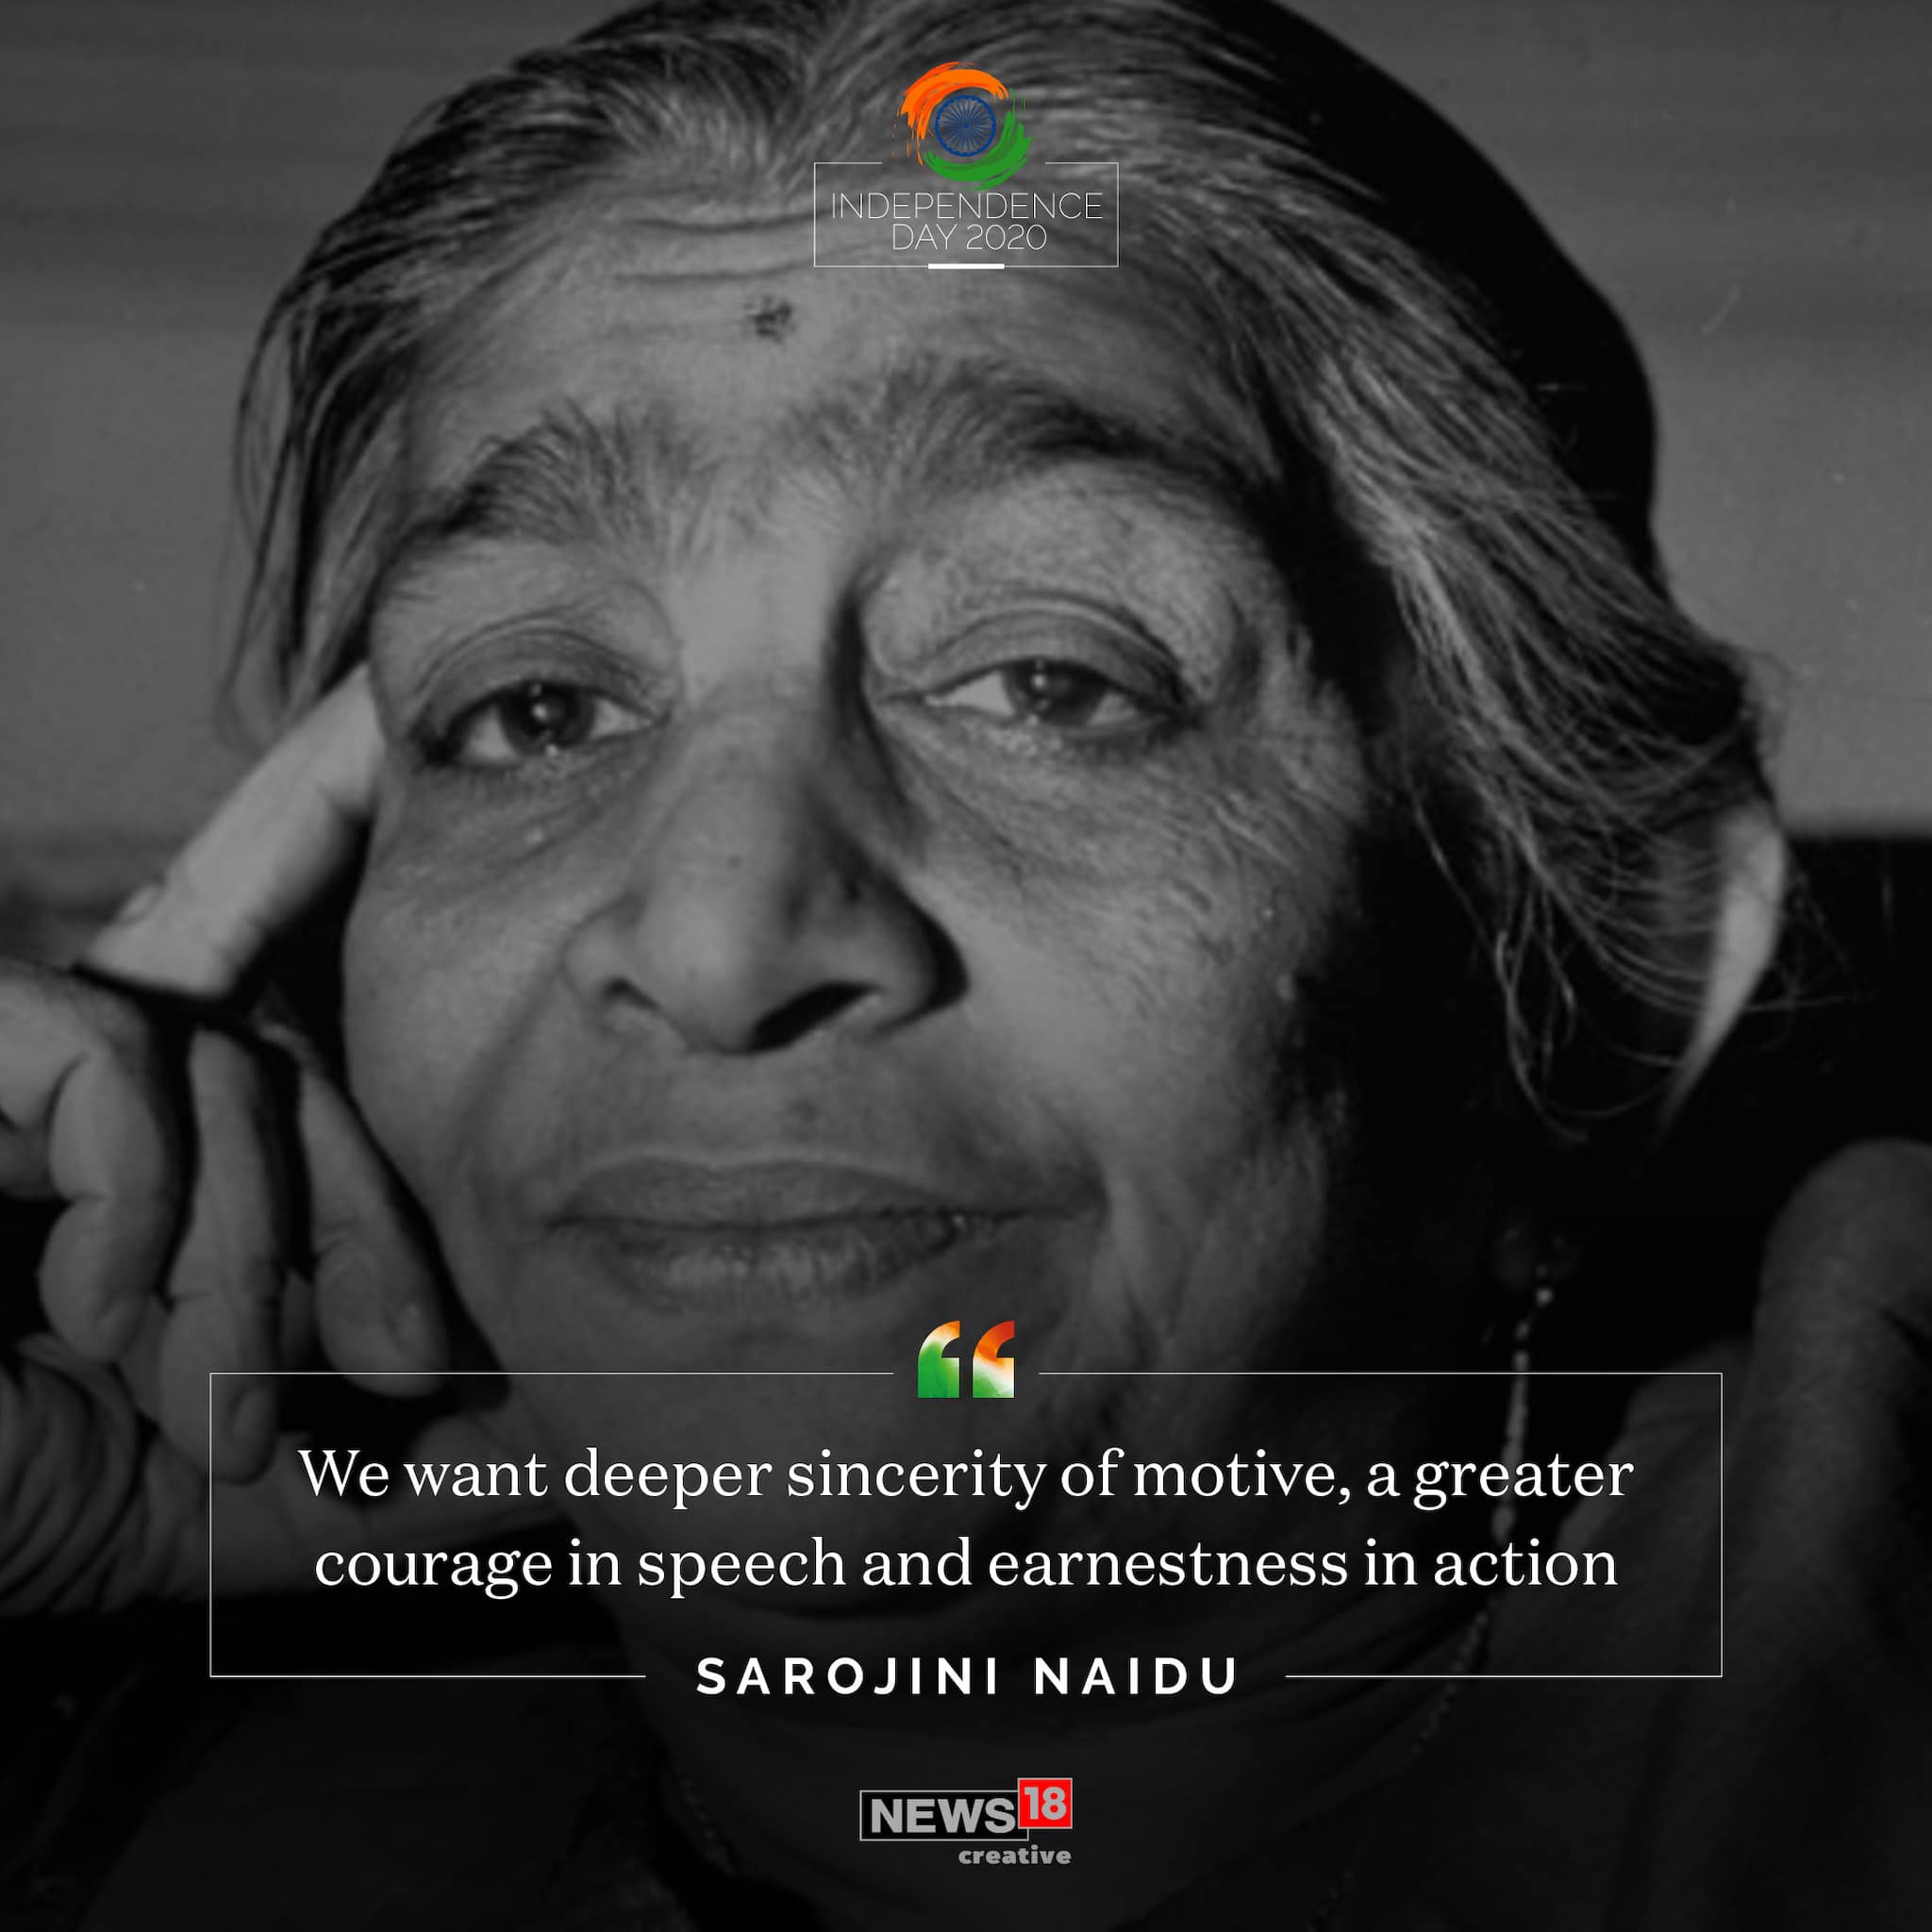 "We want deeper sincerity of motive, a greater courage in speech and earnestness in action" quote by Sarojini Naidu.